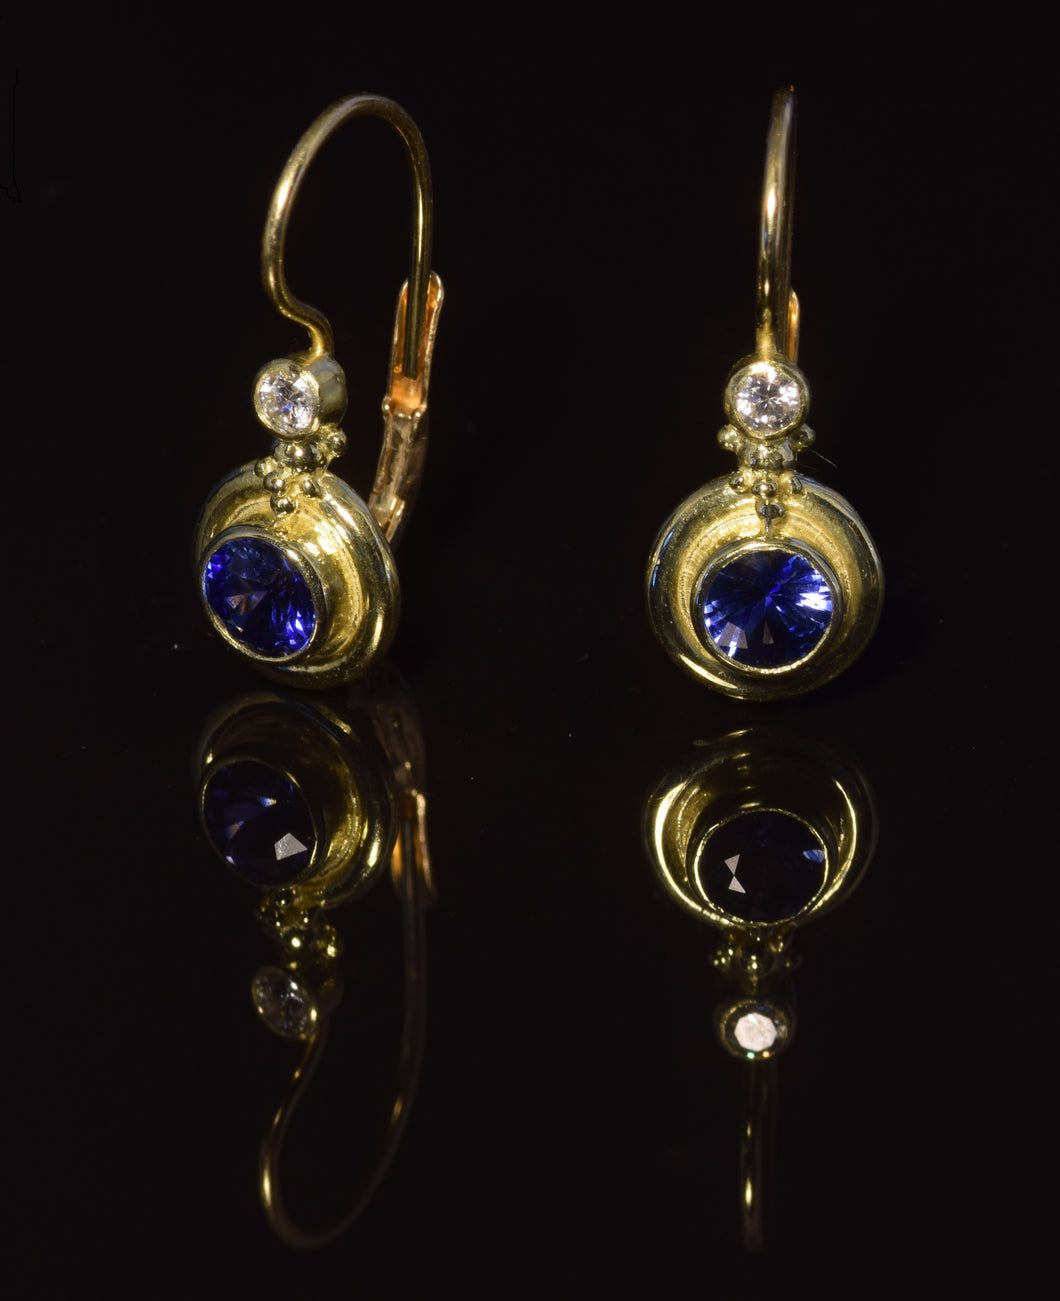 18K yellow gold 4 1/2 mm  faceted sapphire French hook earrings with 0,10 ct total weight diamond accent